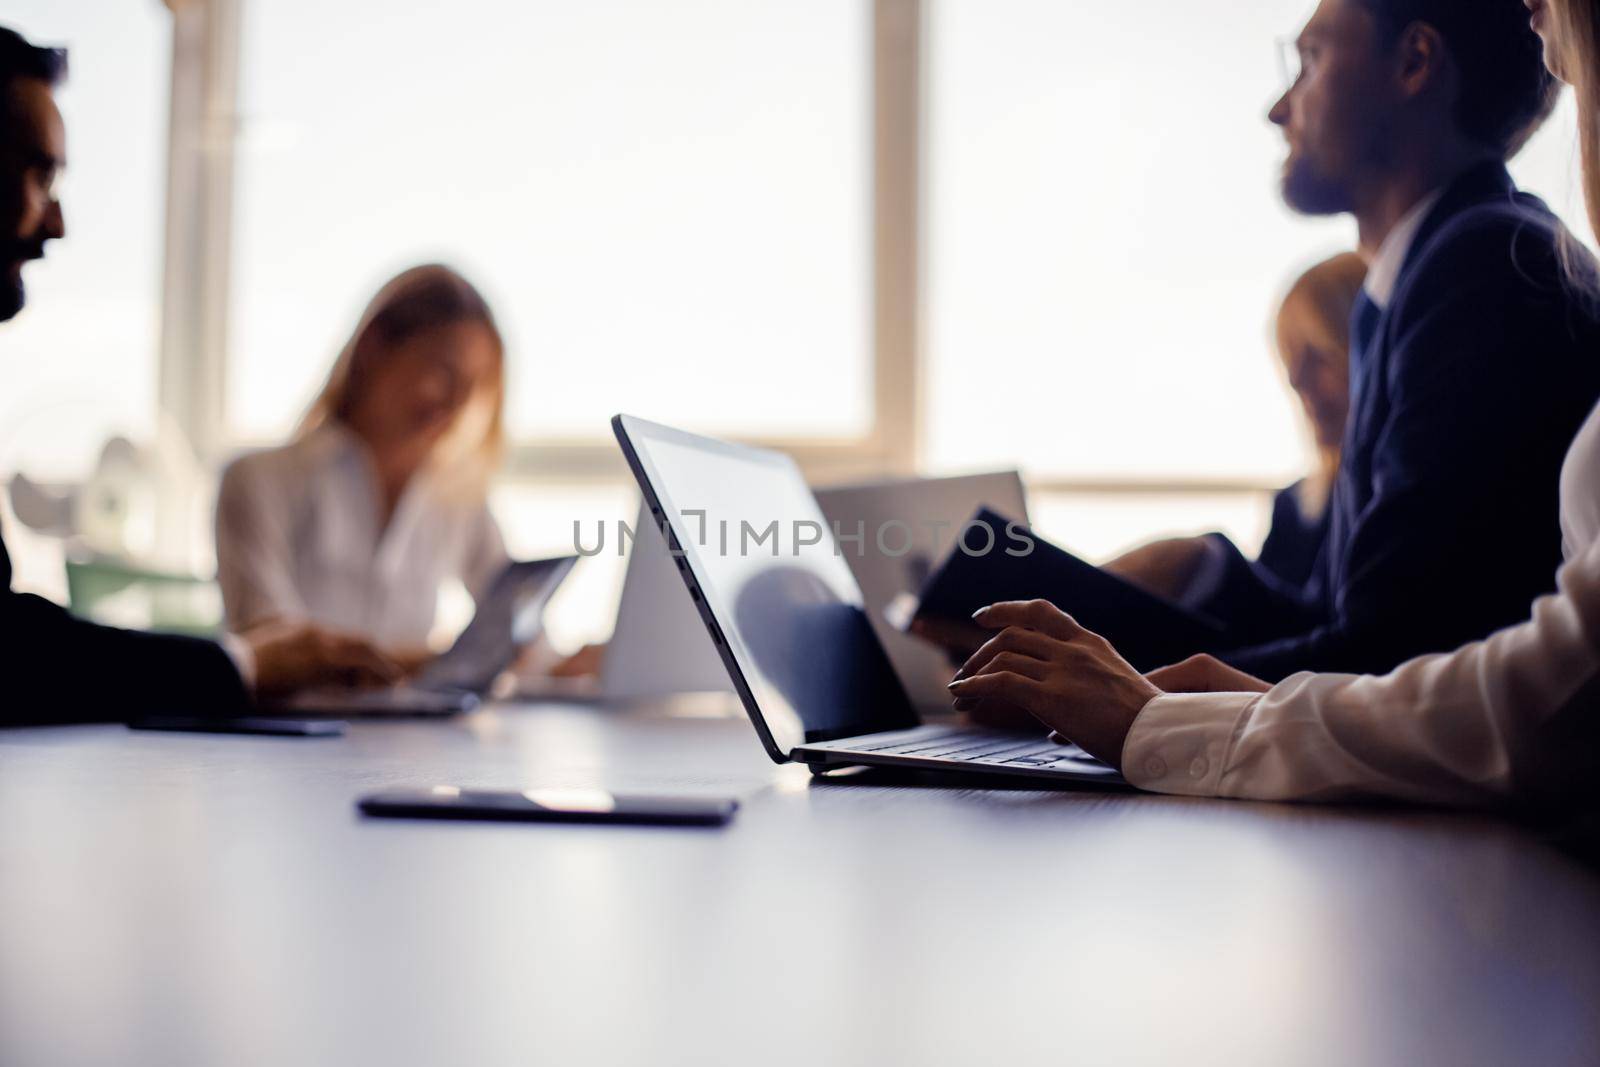 Office staff working with laptop computers in office against of windows on blurred background. Selective focus on female hands typing in foreground. Toned image. by LipikStockMedia